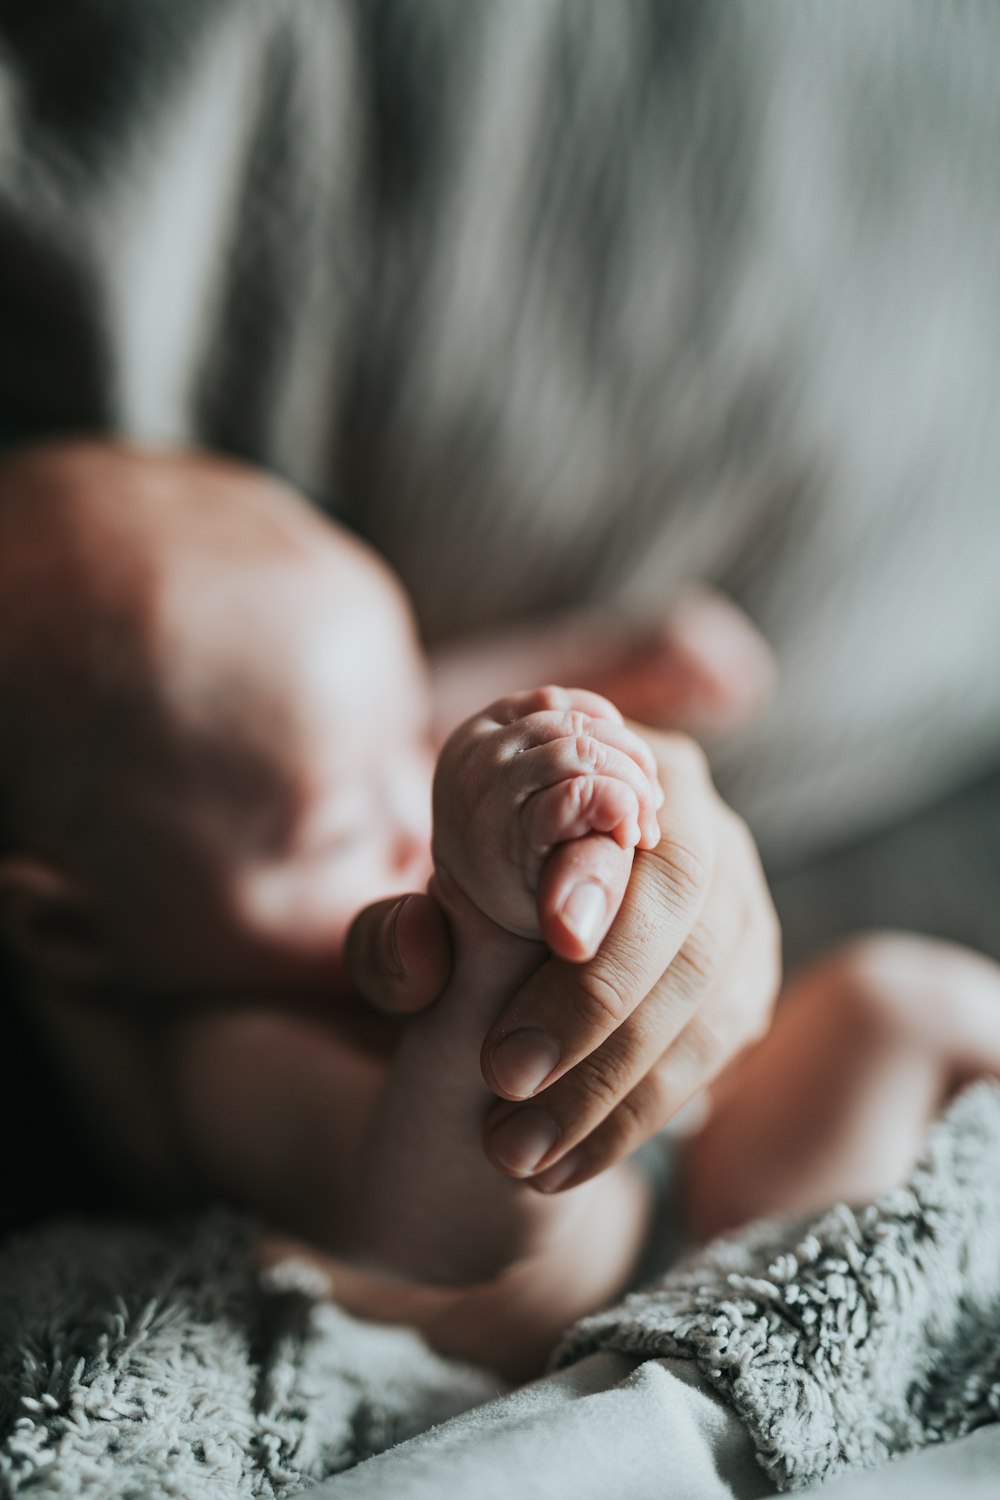 500+ Mother And Child Pictures [HD] | Download Free Images on Unsplash